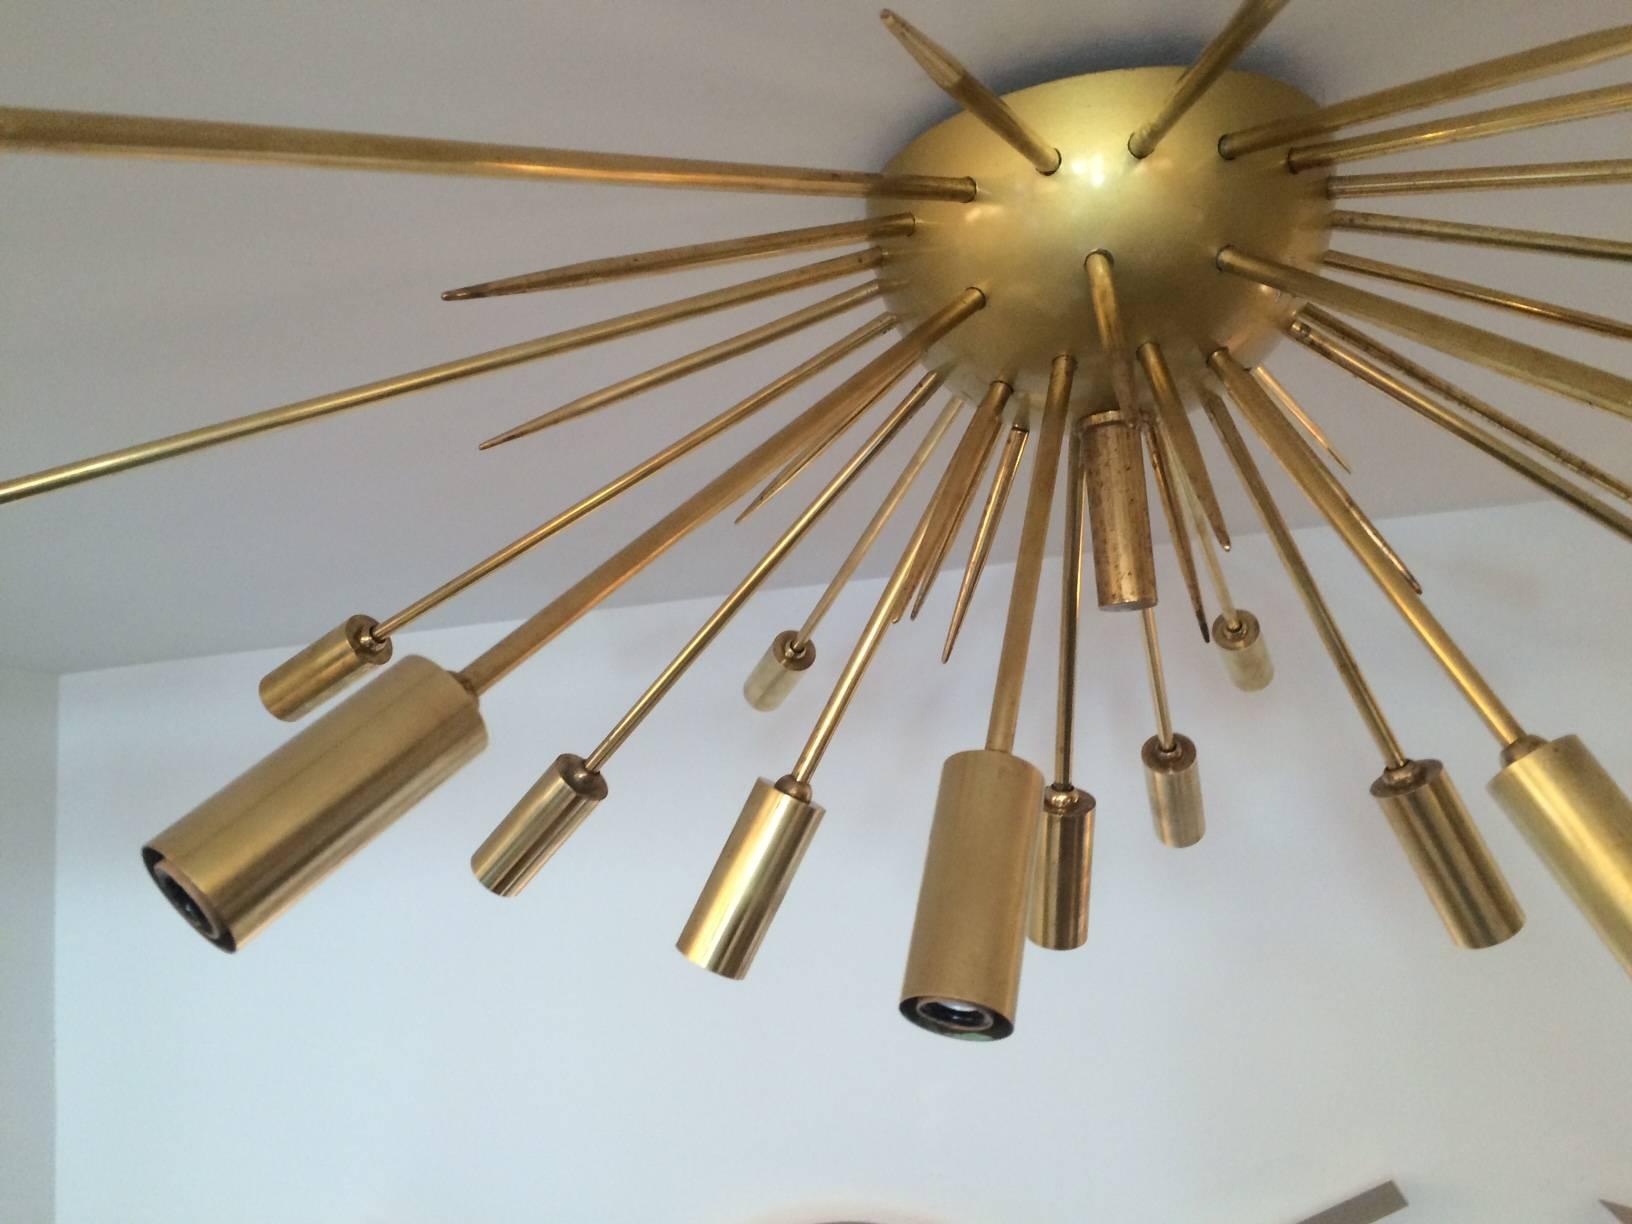 Iconic Sputnik as a ceiling flush mount fixture attributed to Stilnovo.
19 polished brass light stems radiating from a matte
brass semi-circular center. Additional brass 